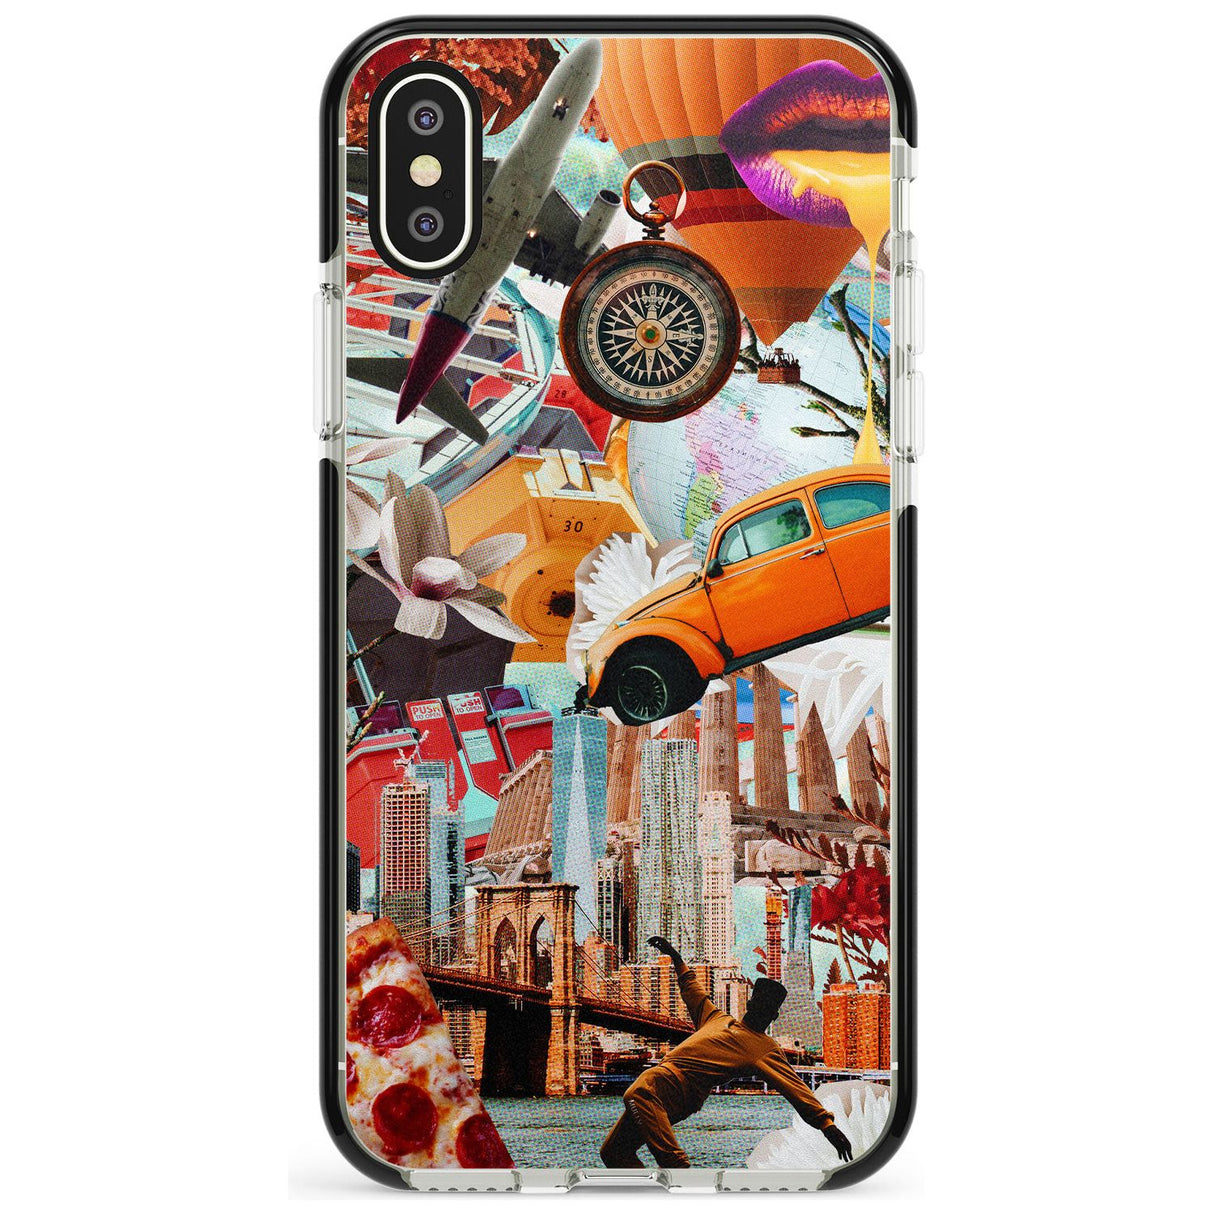 Vintage Collage: New York Mix Black Impact Phone Case for iPhone X XS Max XR